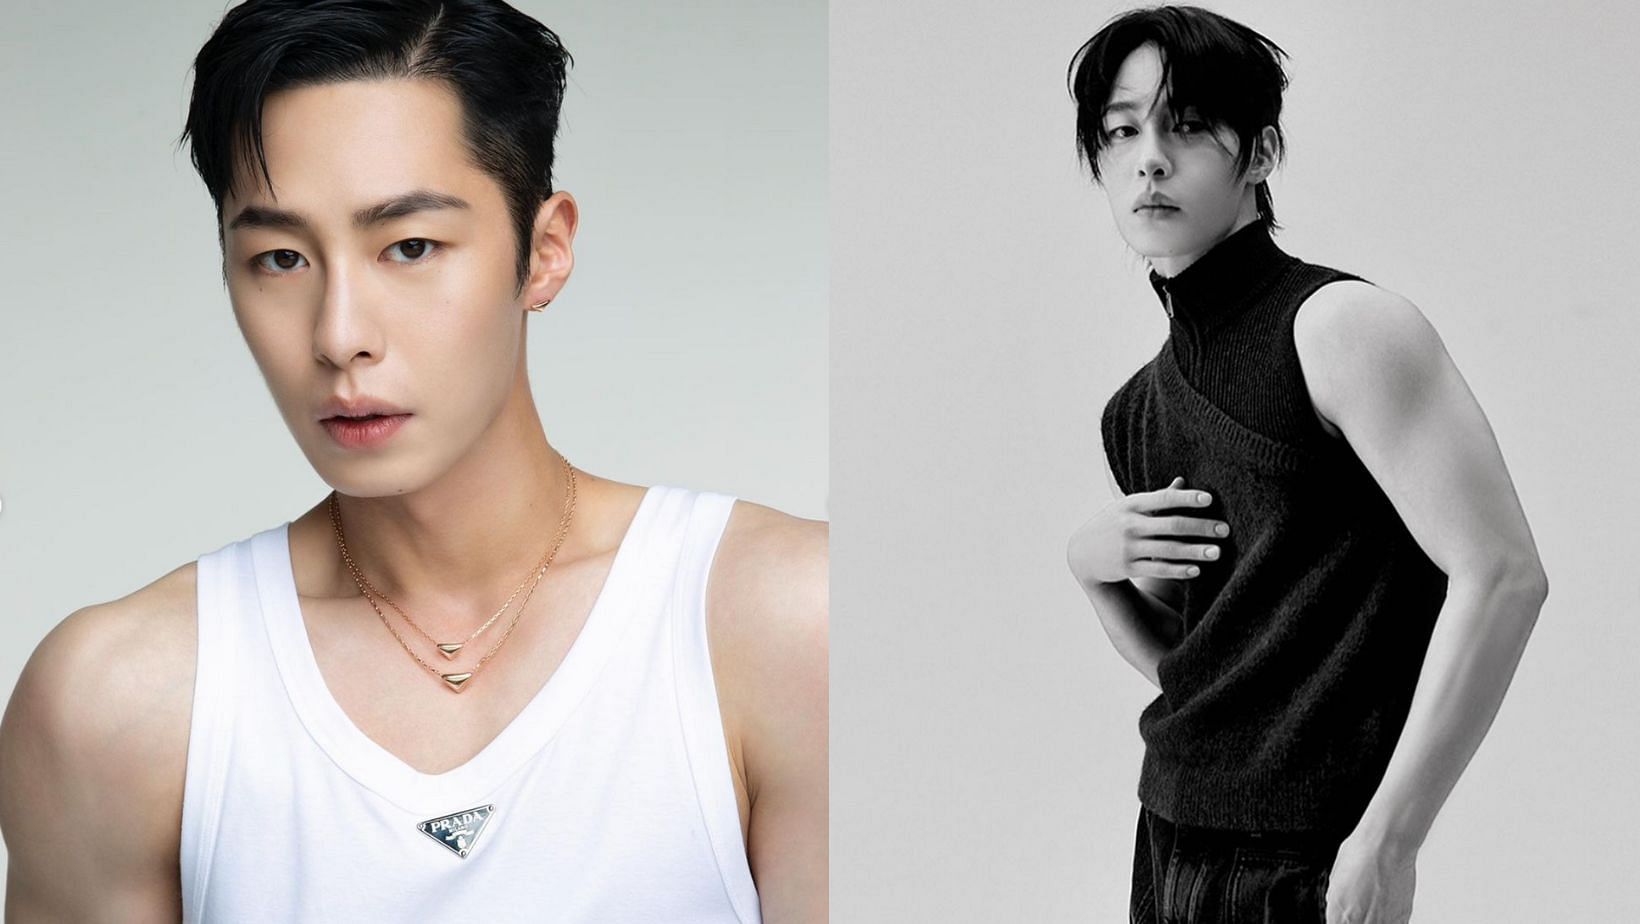 Lee Jae-wook reported to split from C-JeS Entertainment announcing his one-man agency, company responds. (Images via Instagram/@jxxvvxxk)